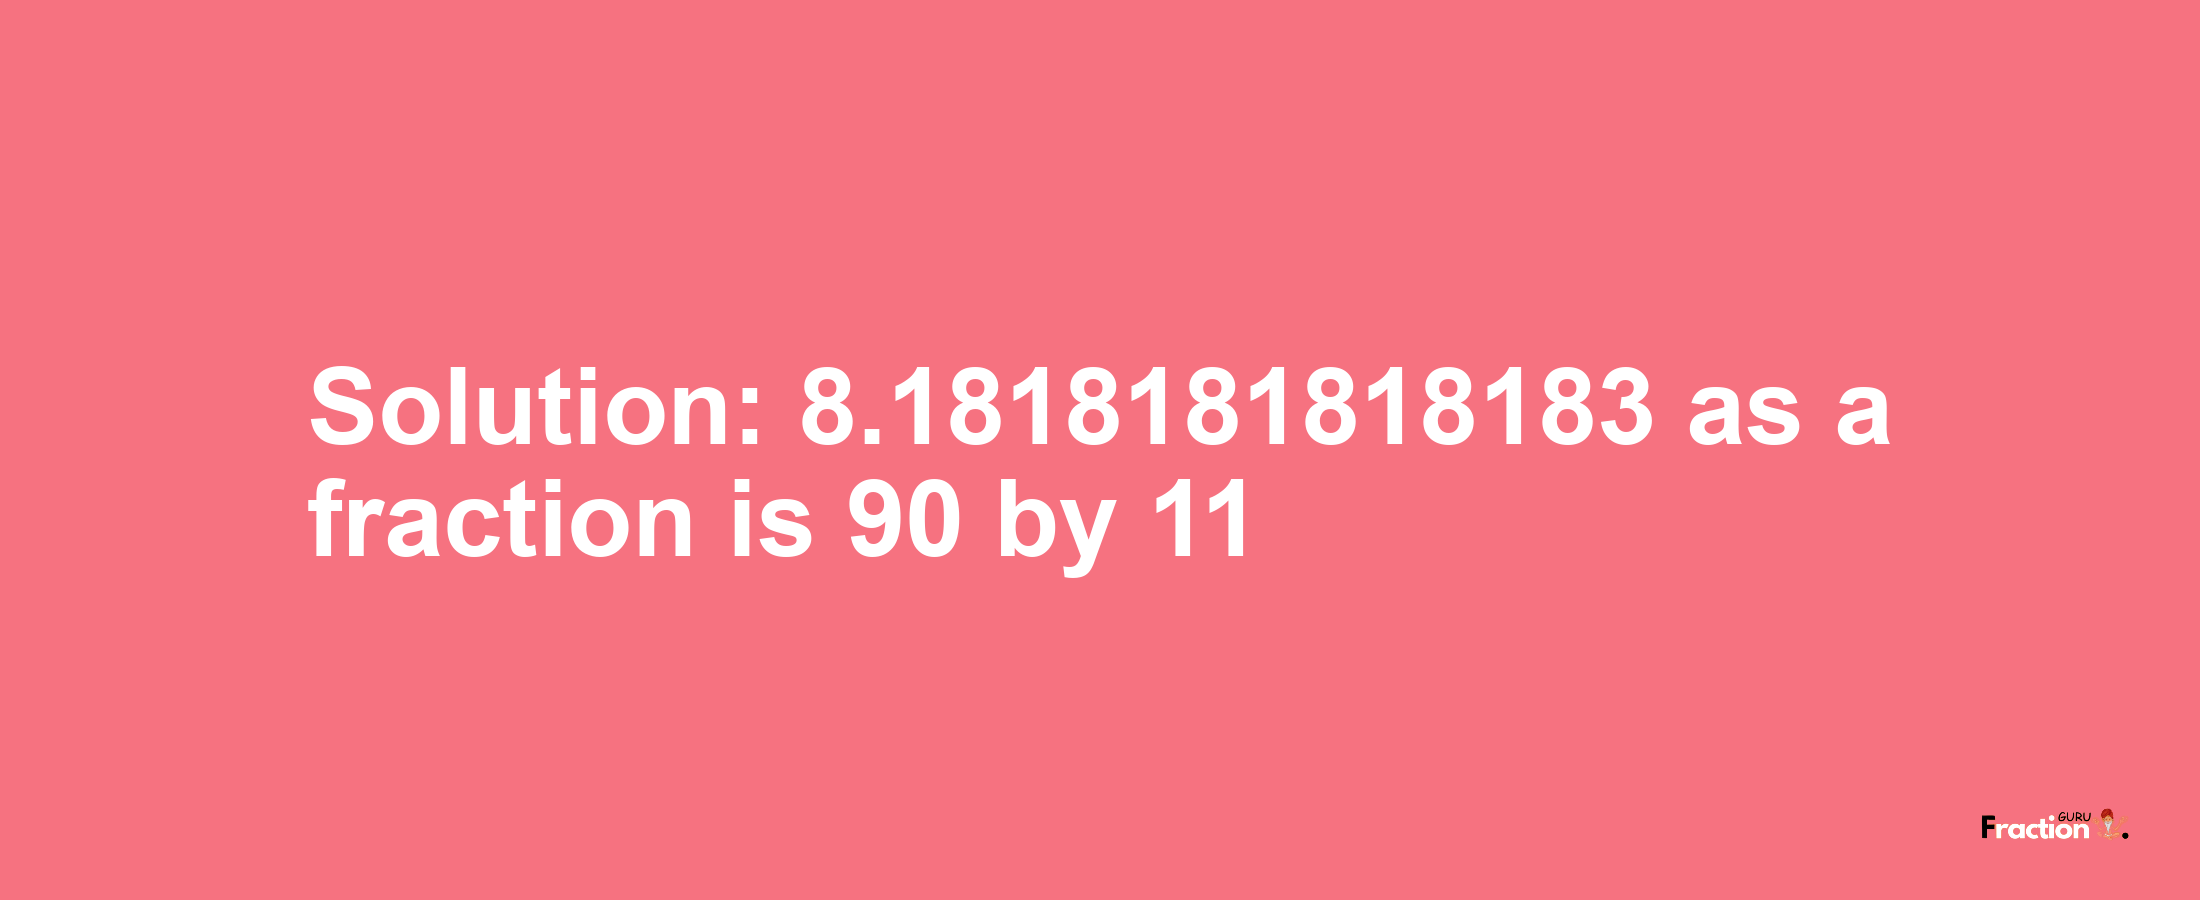 Solution:8.1818181818183 as a fraction is 90/11